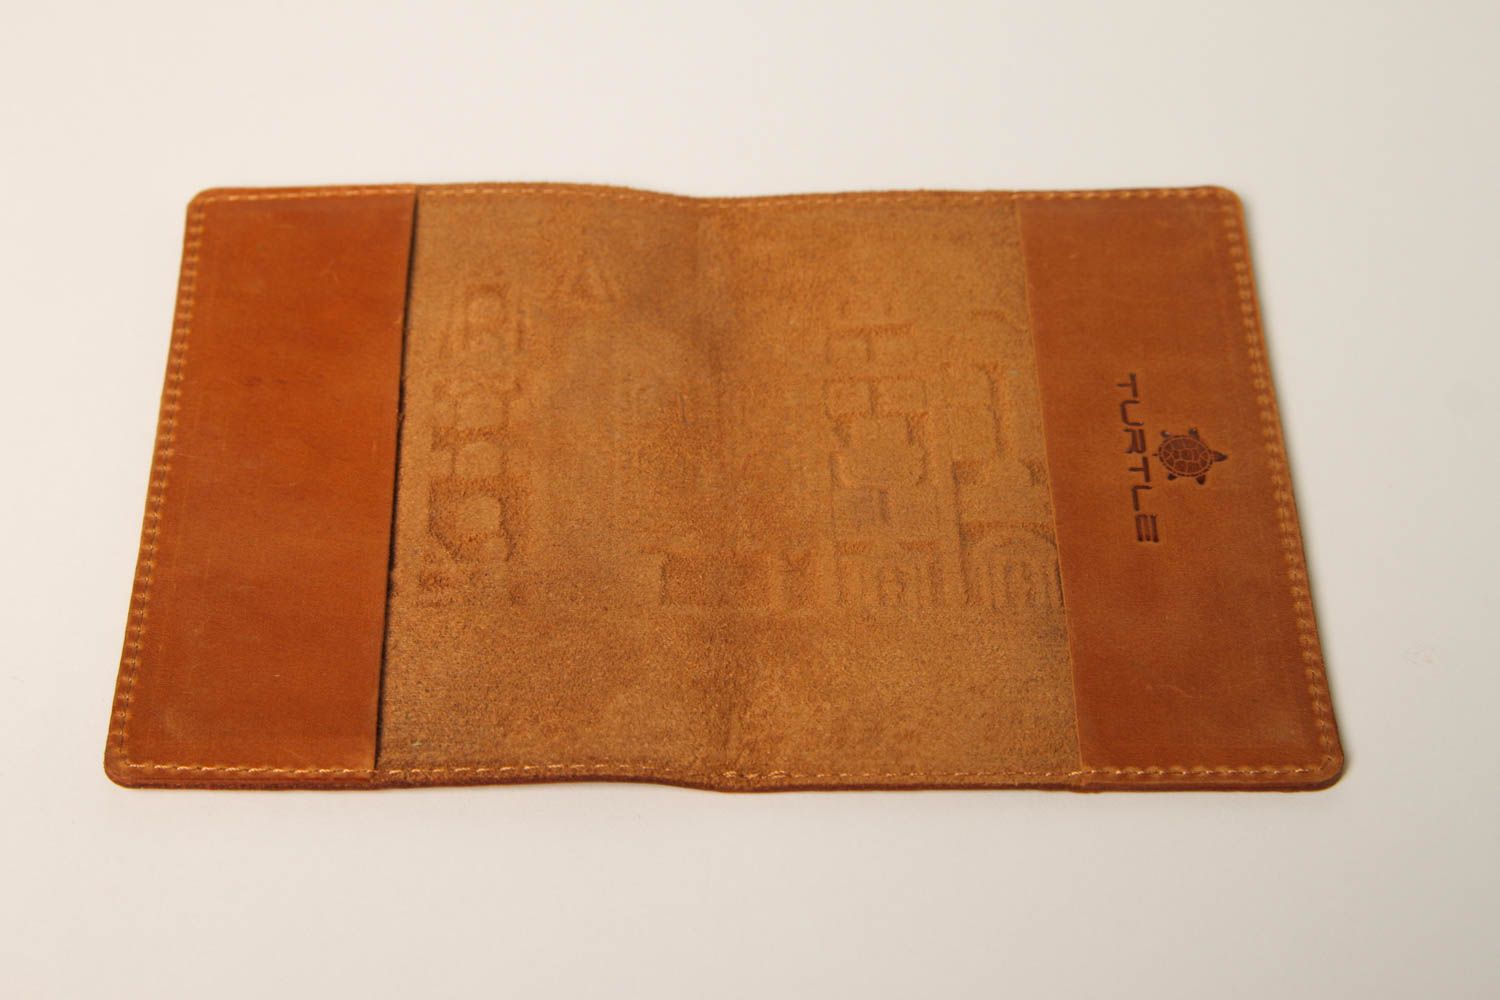 Unusual handmade passport cover leather goods cover for documents gift ideas photo 5